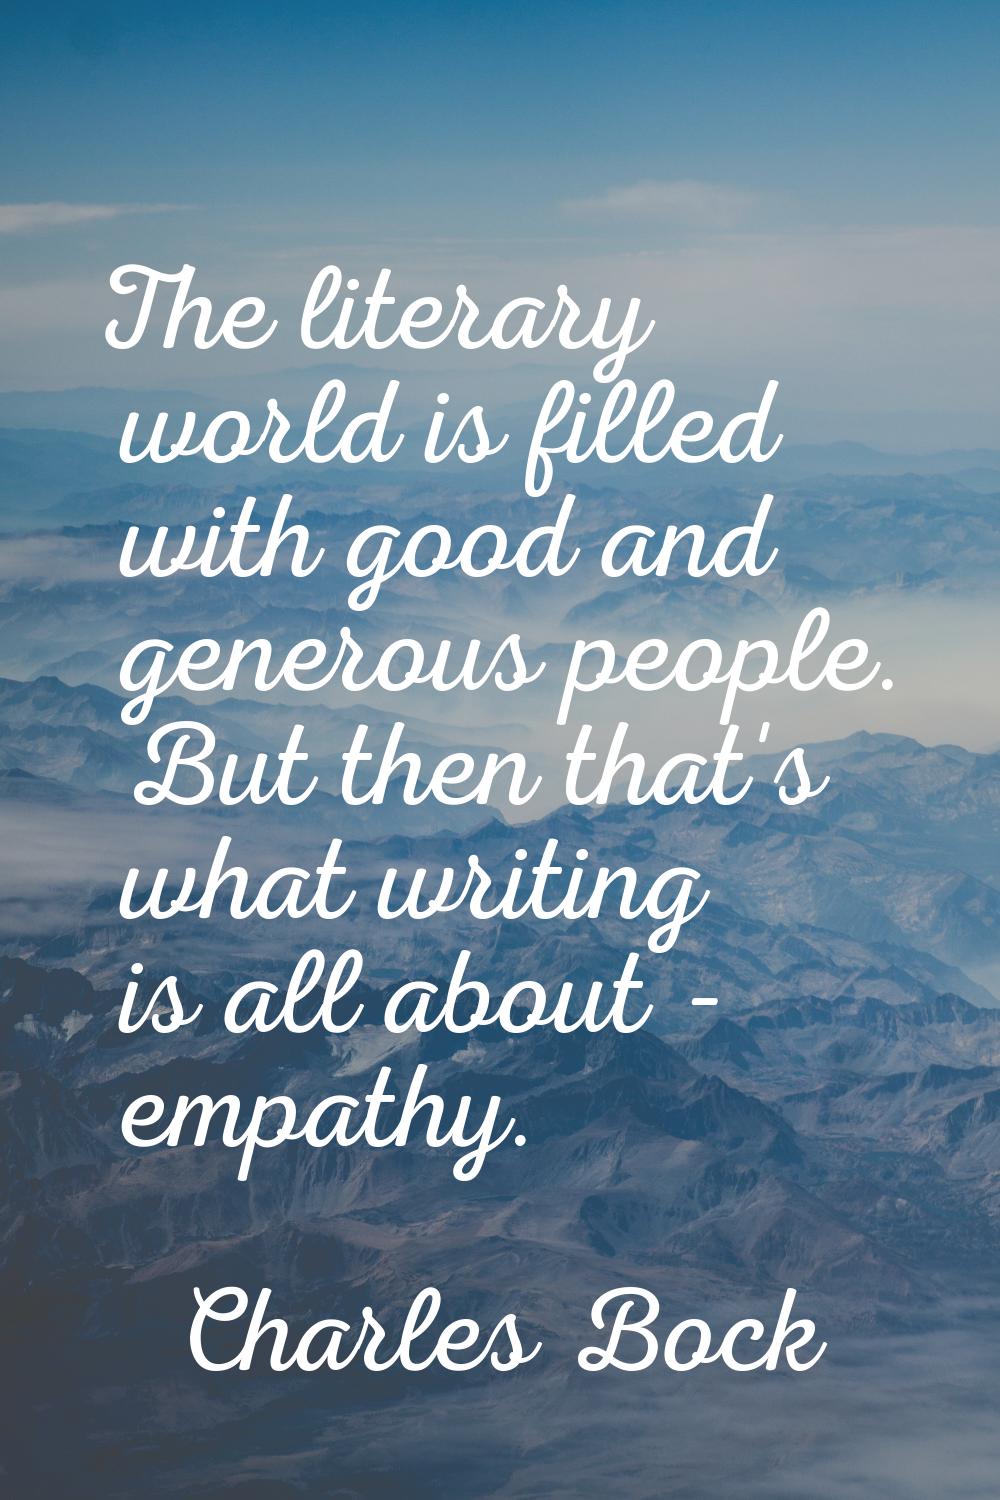 The literary world is filled with good and generous people. But then that's what writing is all abo